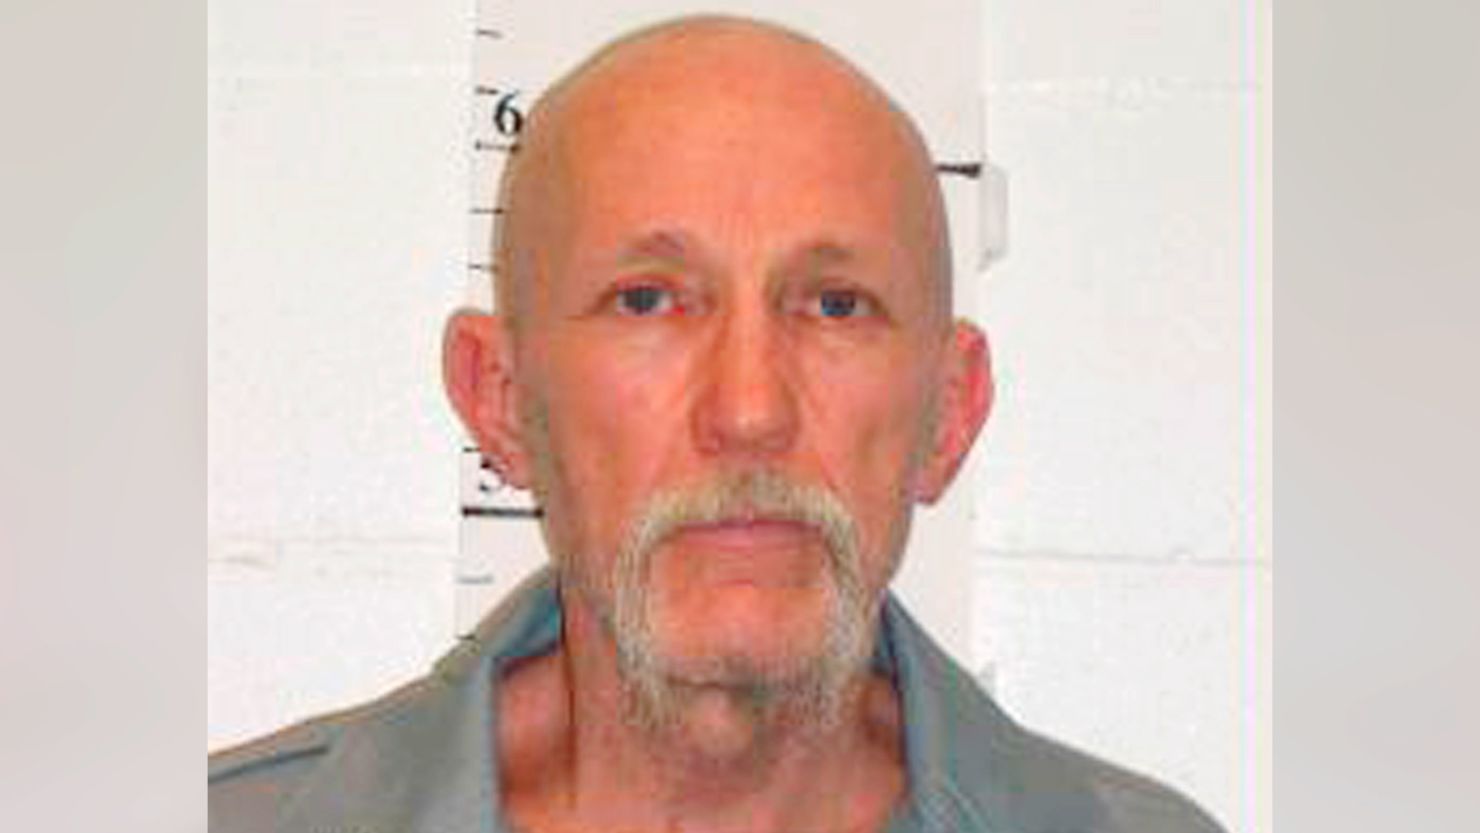 Walter Barton, convicted of killing an 81-year-old acquaintance nearly three decades ago, became the first US inmate executed during the coronavirus pandemic.